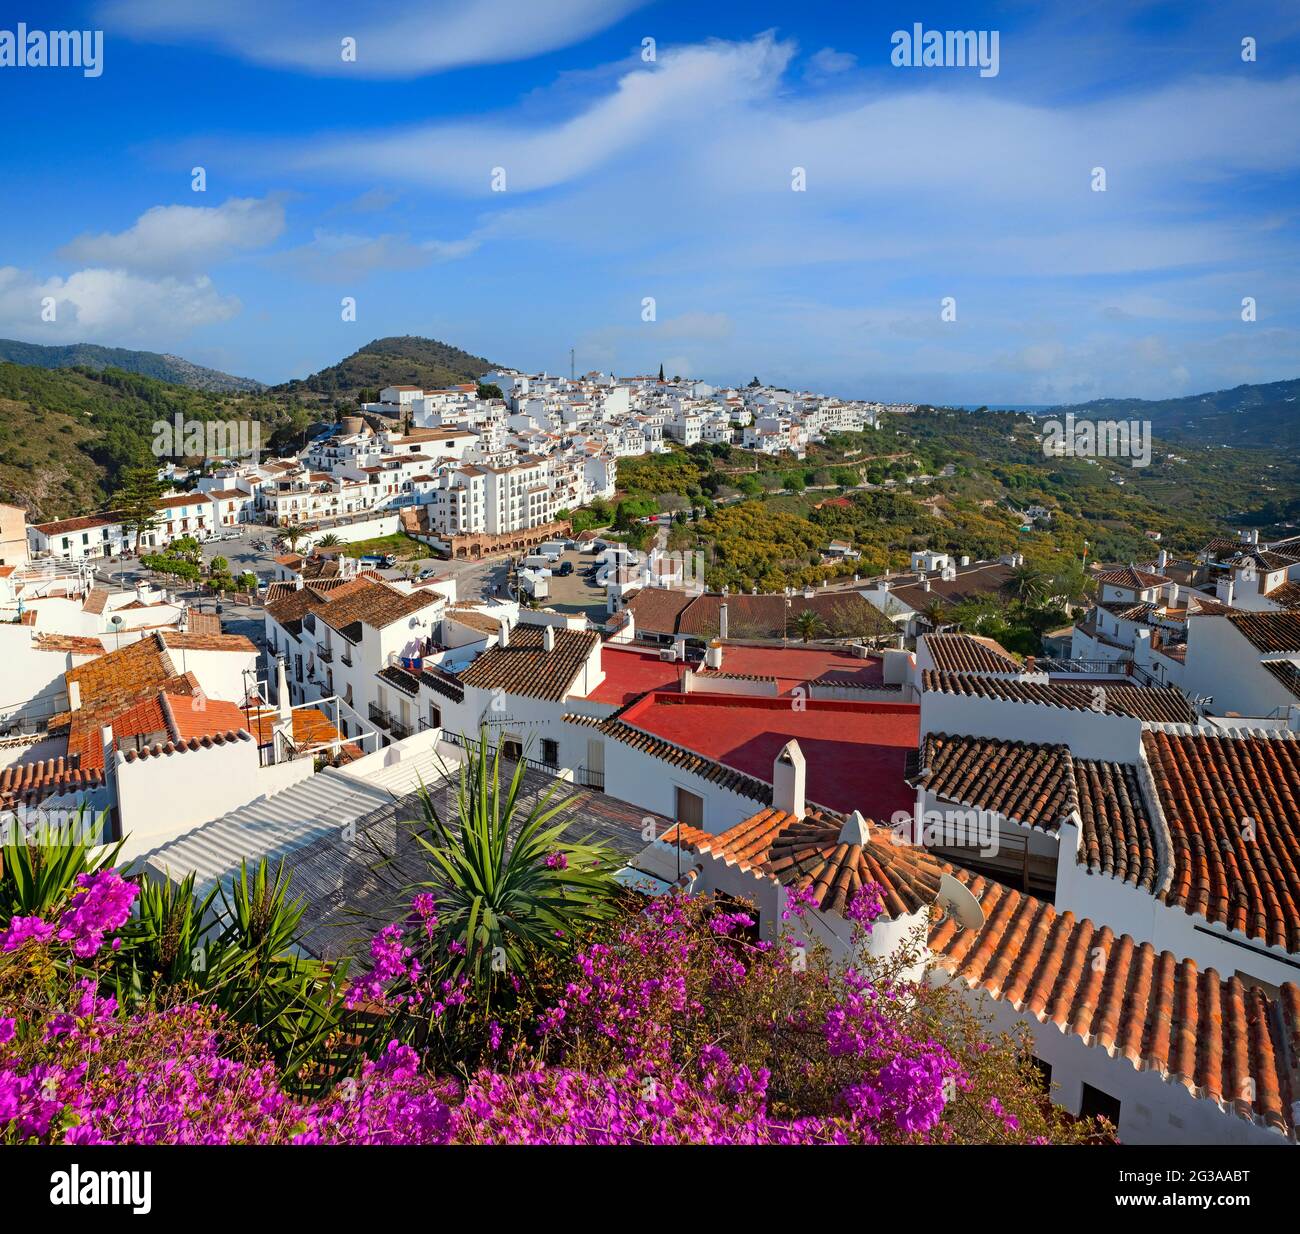 A view over Bougainvillea of Frigiliana, described as 'Spain's most beautiful and well-preserved village'.   Malaga Province, Andalucia, Spain Stock Photo